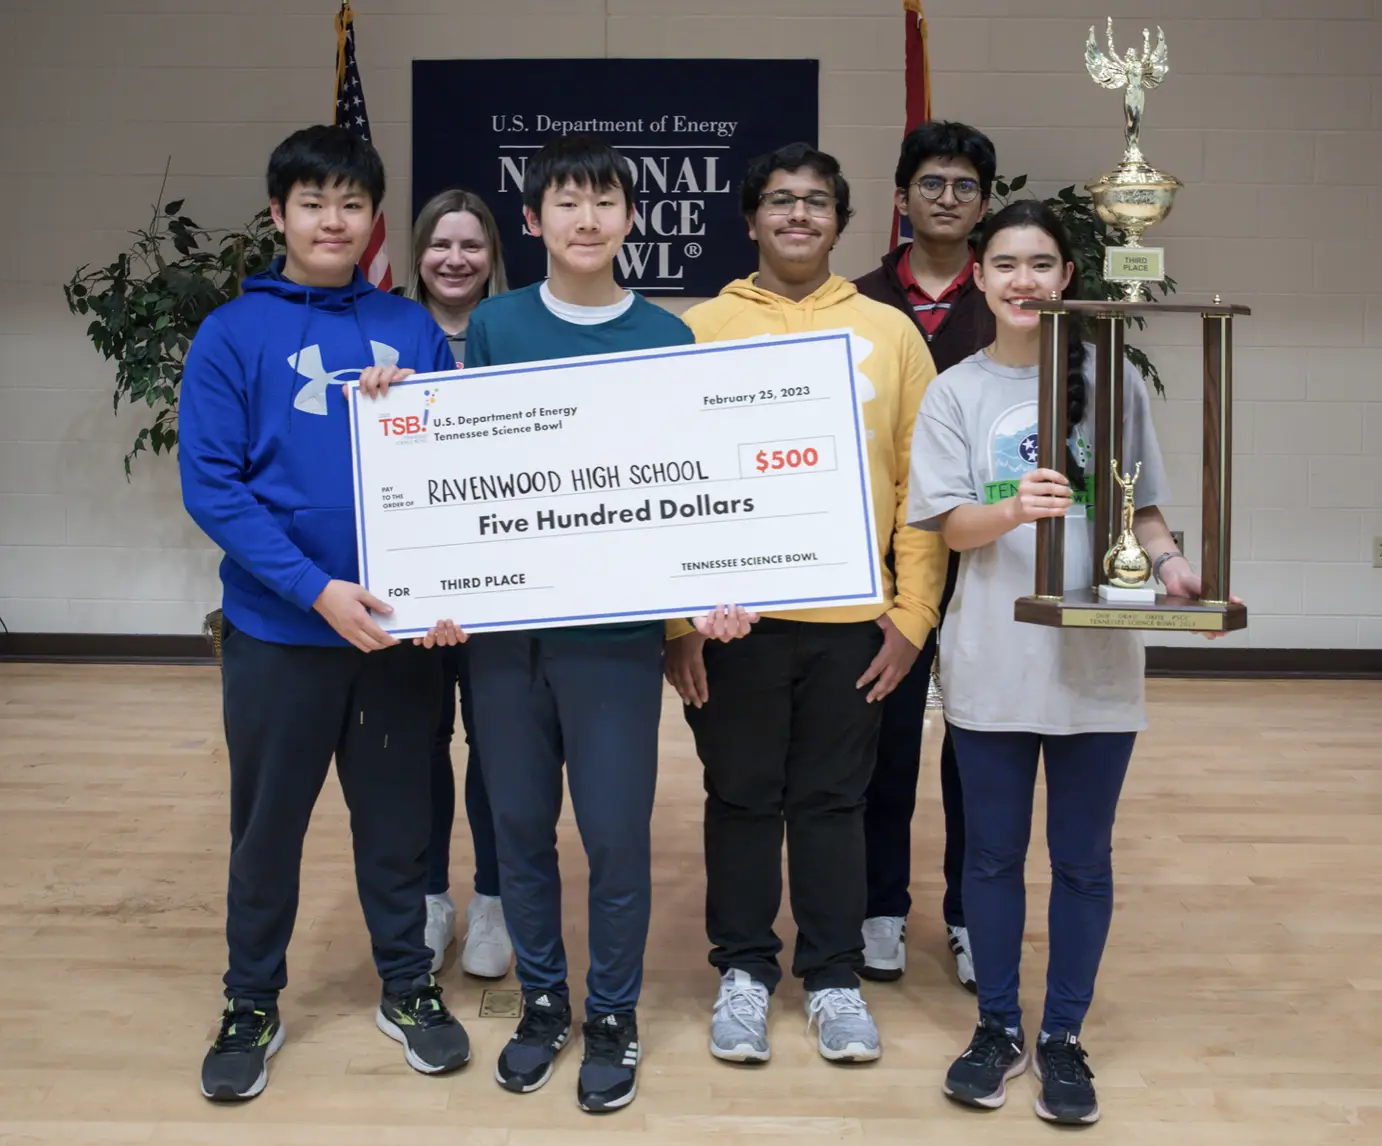 Tennessee Science Bowl third place - Ravenwood High School